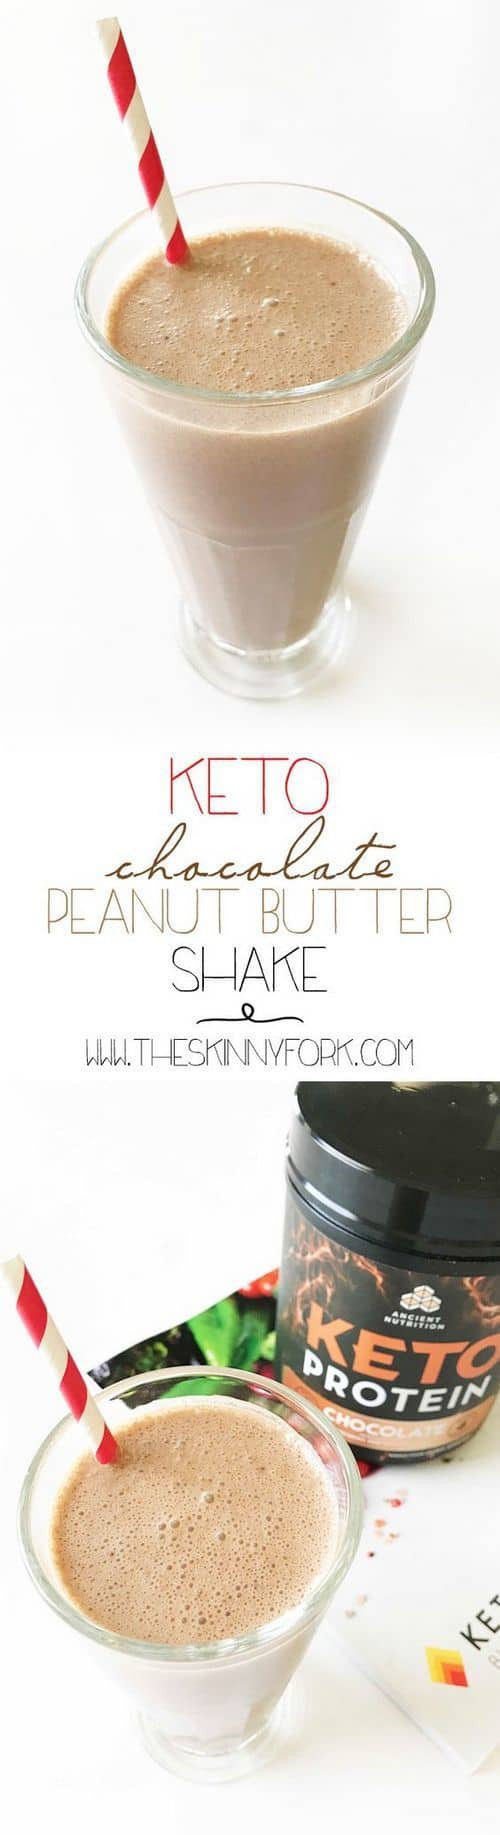 Keto Breakfast Shake
 15 Keto Breakfast Shake Recipes Morning Packed with